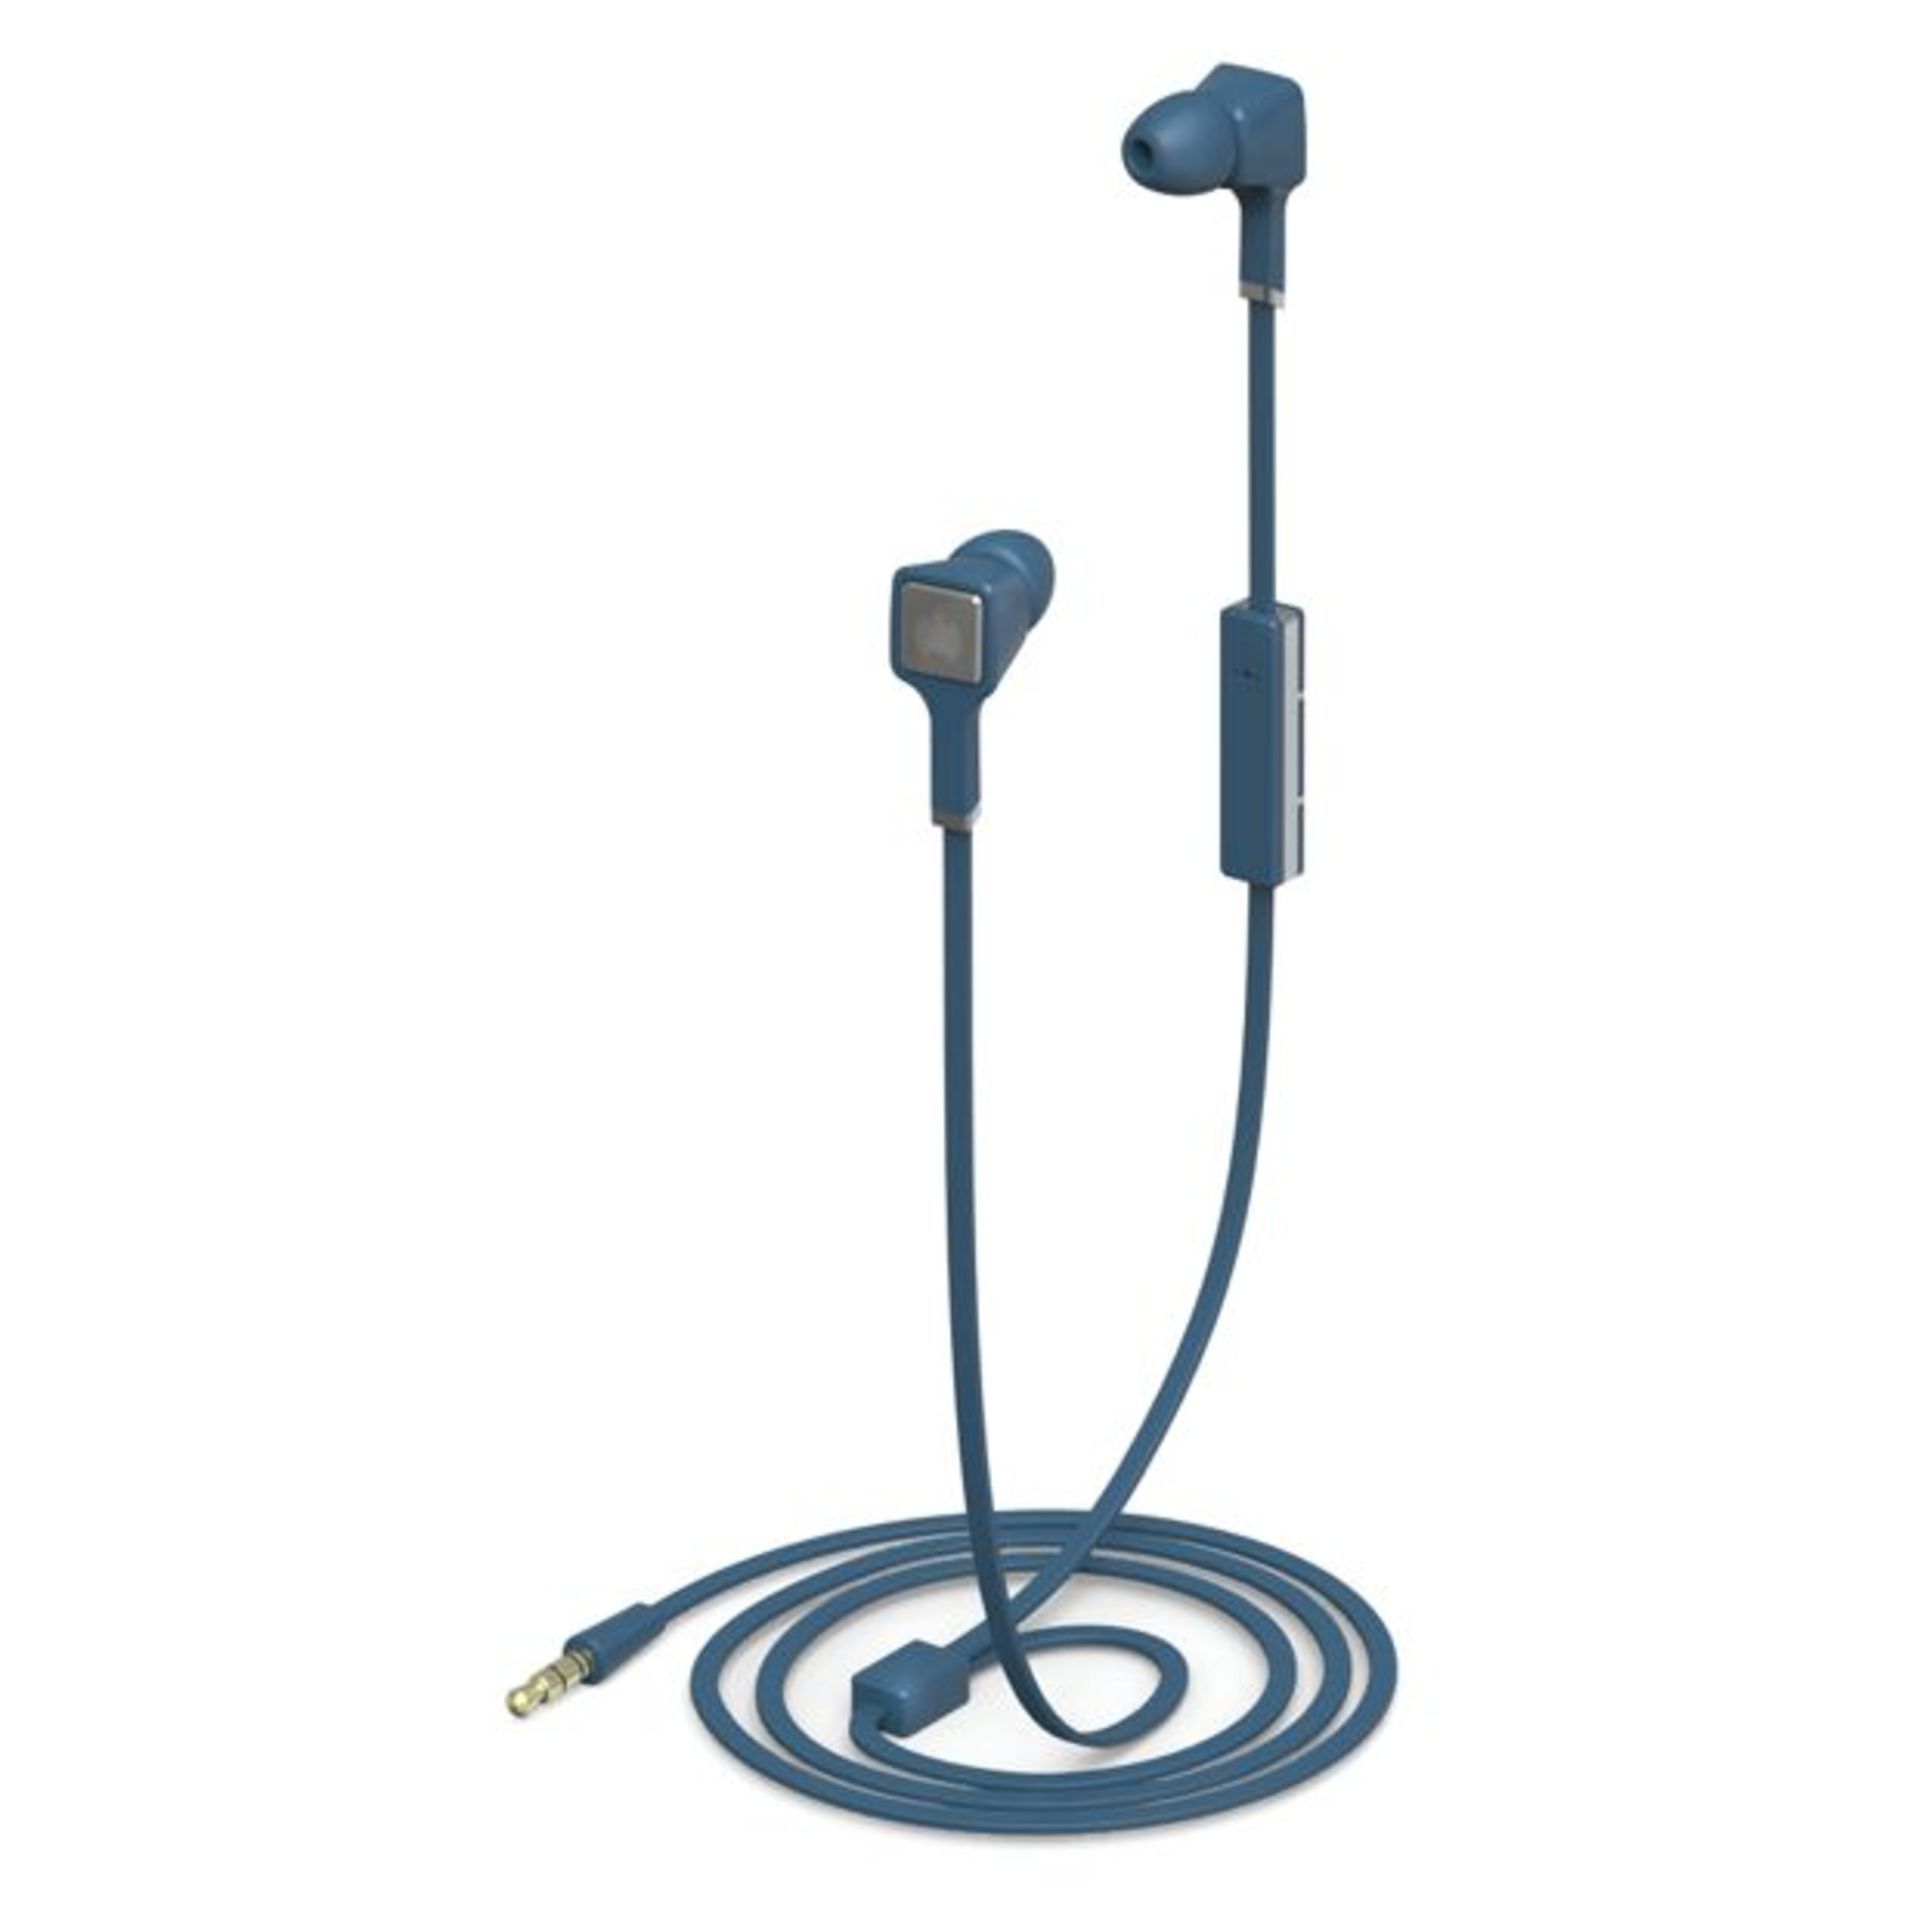 V Brand New Ministry Of Sound Audio In - In Ear Headphones - Blue/Grey - RRP£39.99